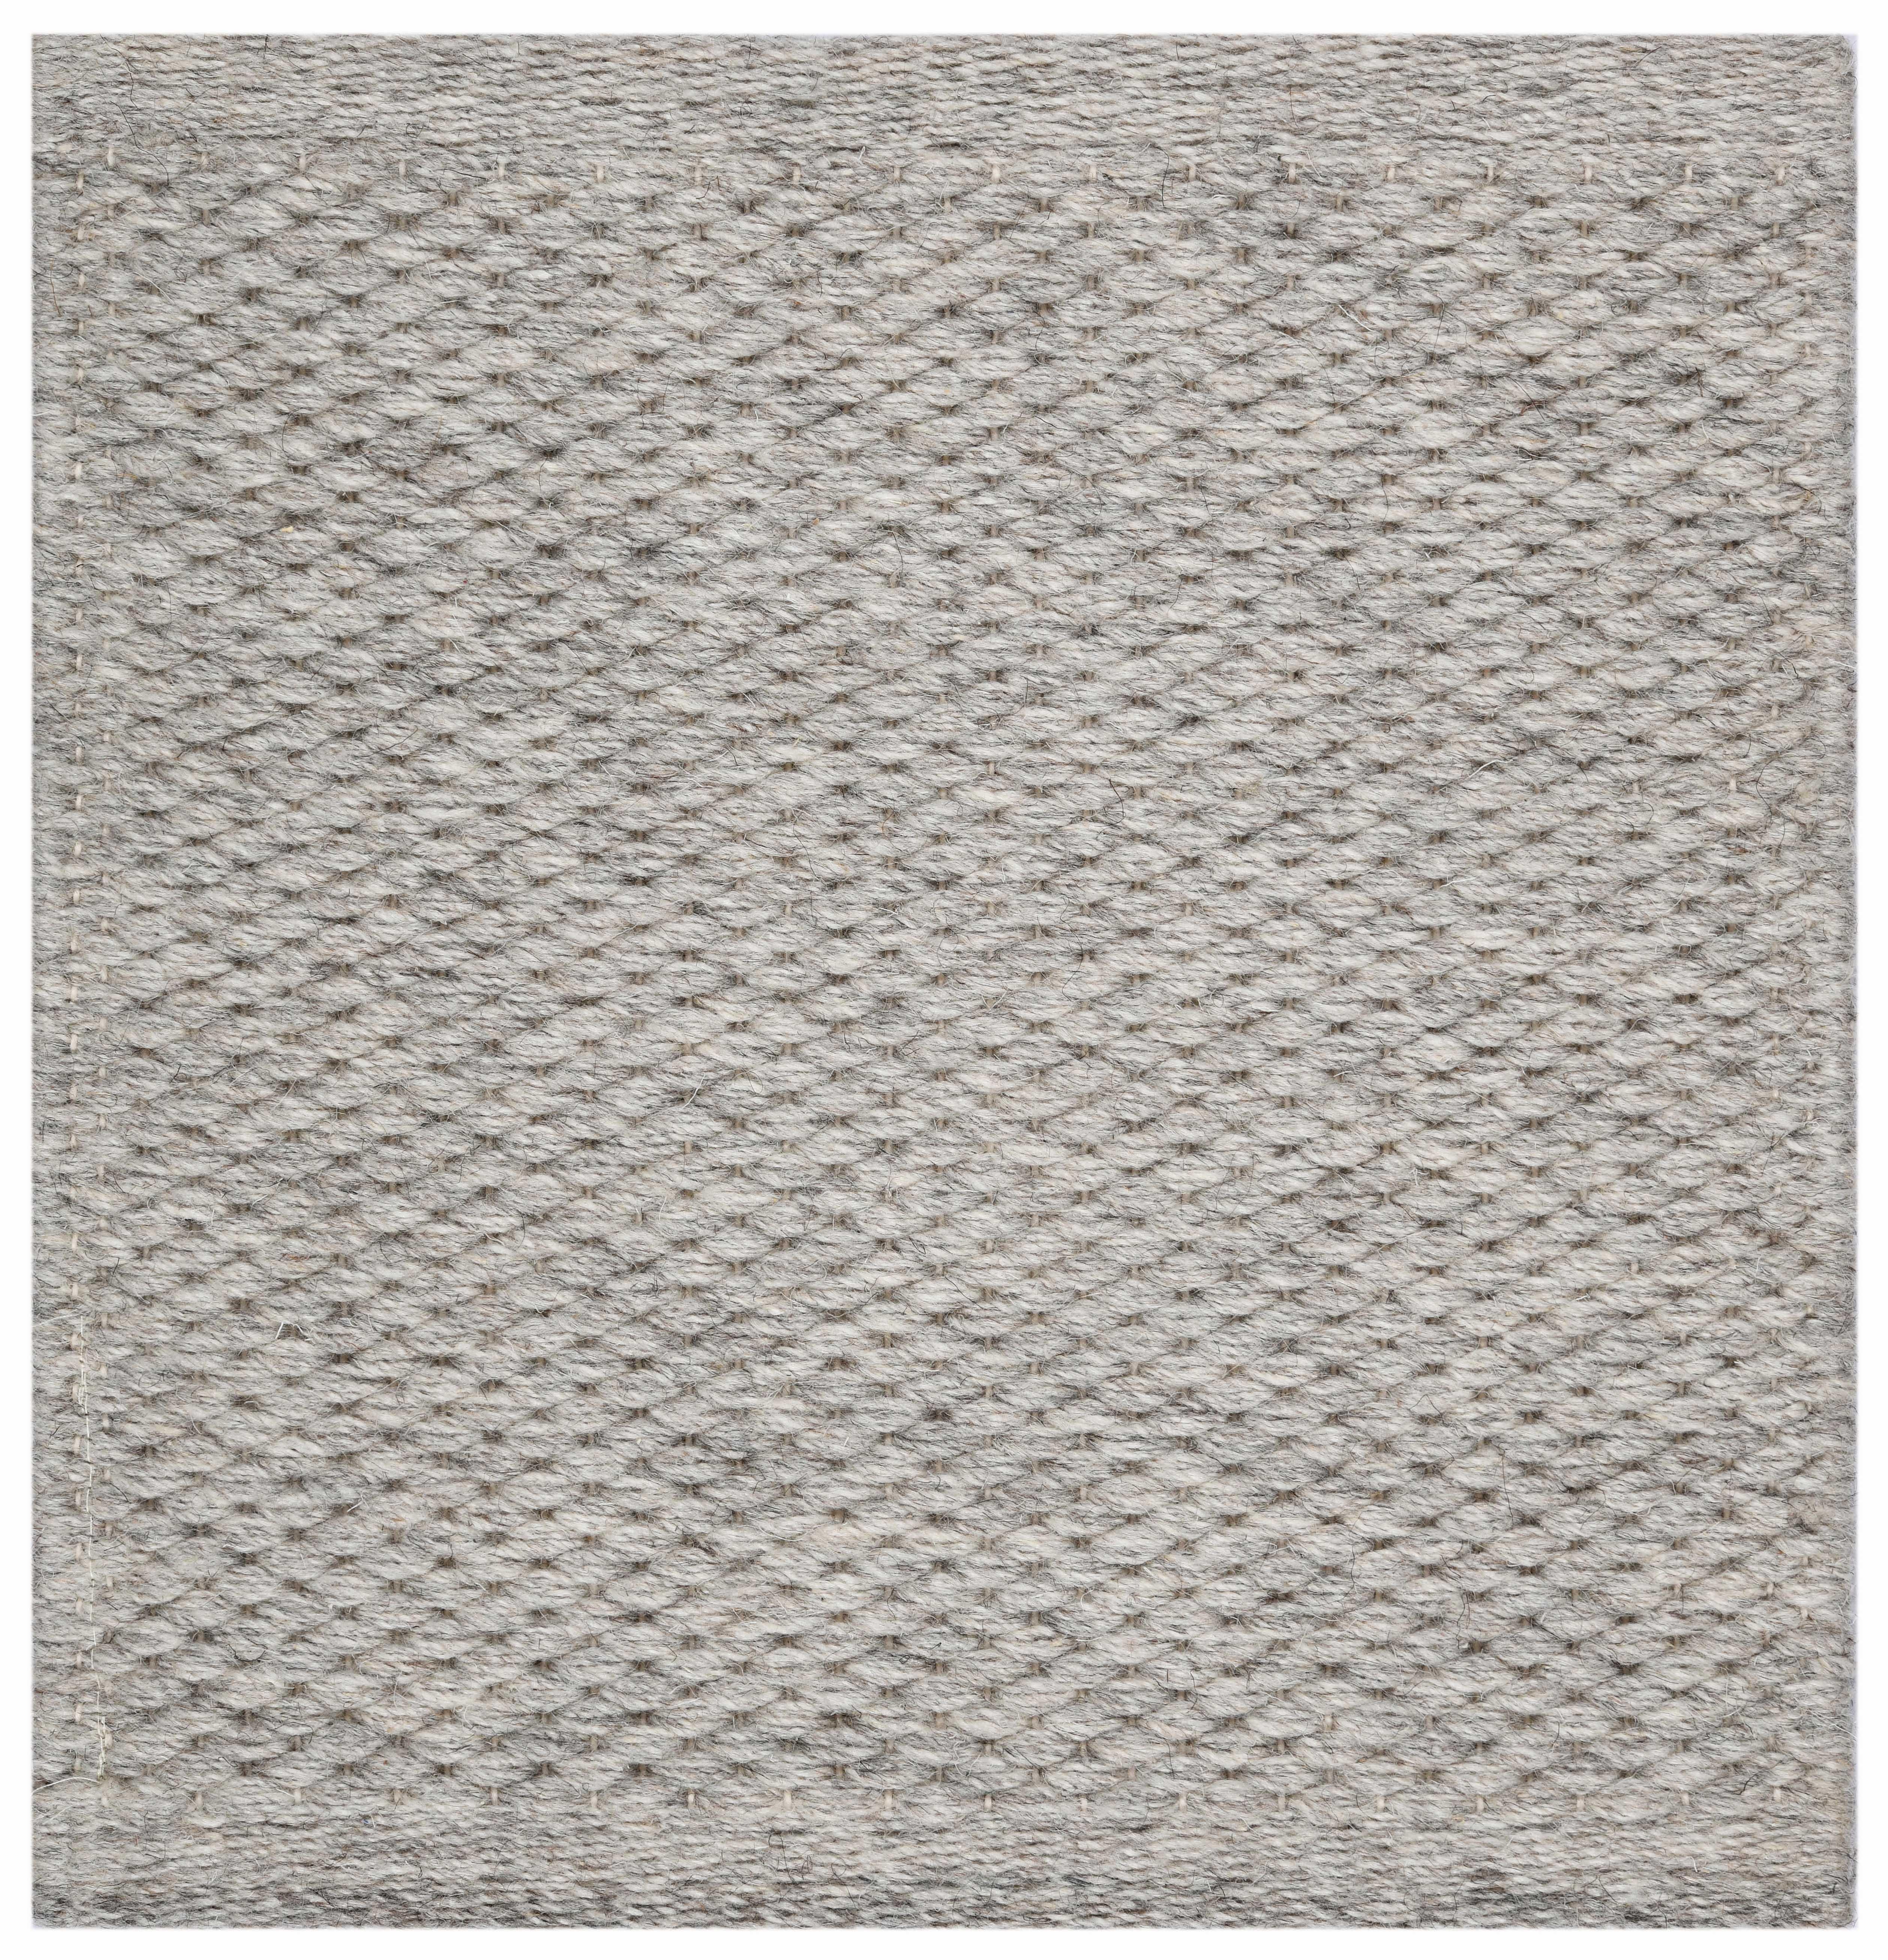 Contemporary Quies, Grey, Handwoven, New Zealand and Mediterranean wools, 8' x 10' For Sale